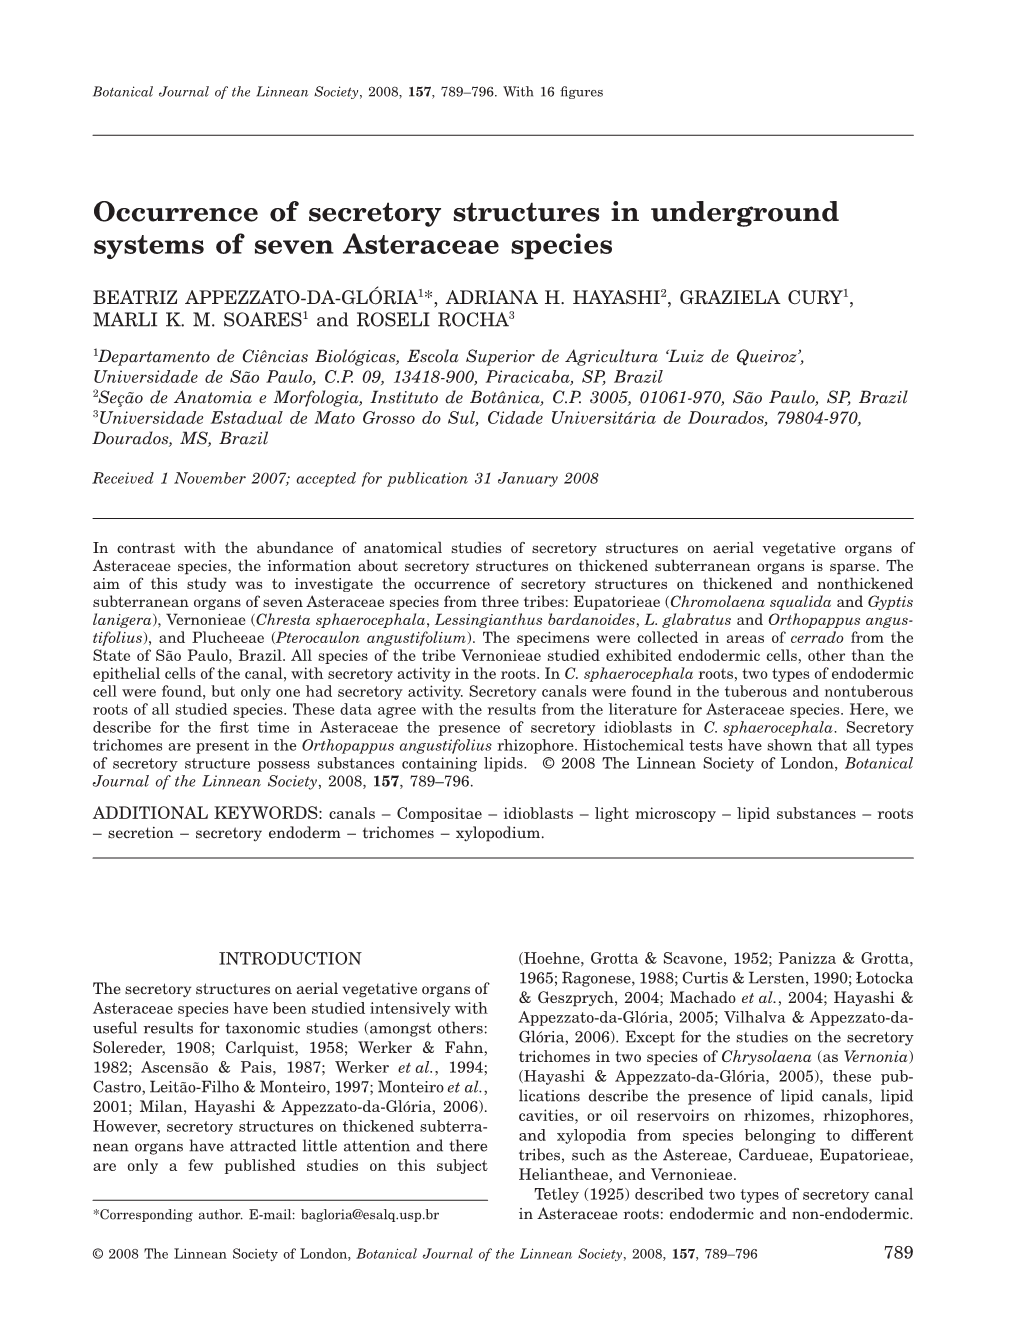 Occurrence of Secretory Structures in Underground Systems of Seven Asteraceae Species